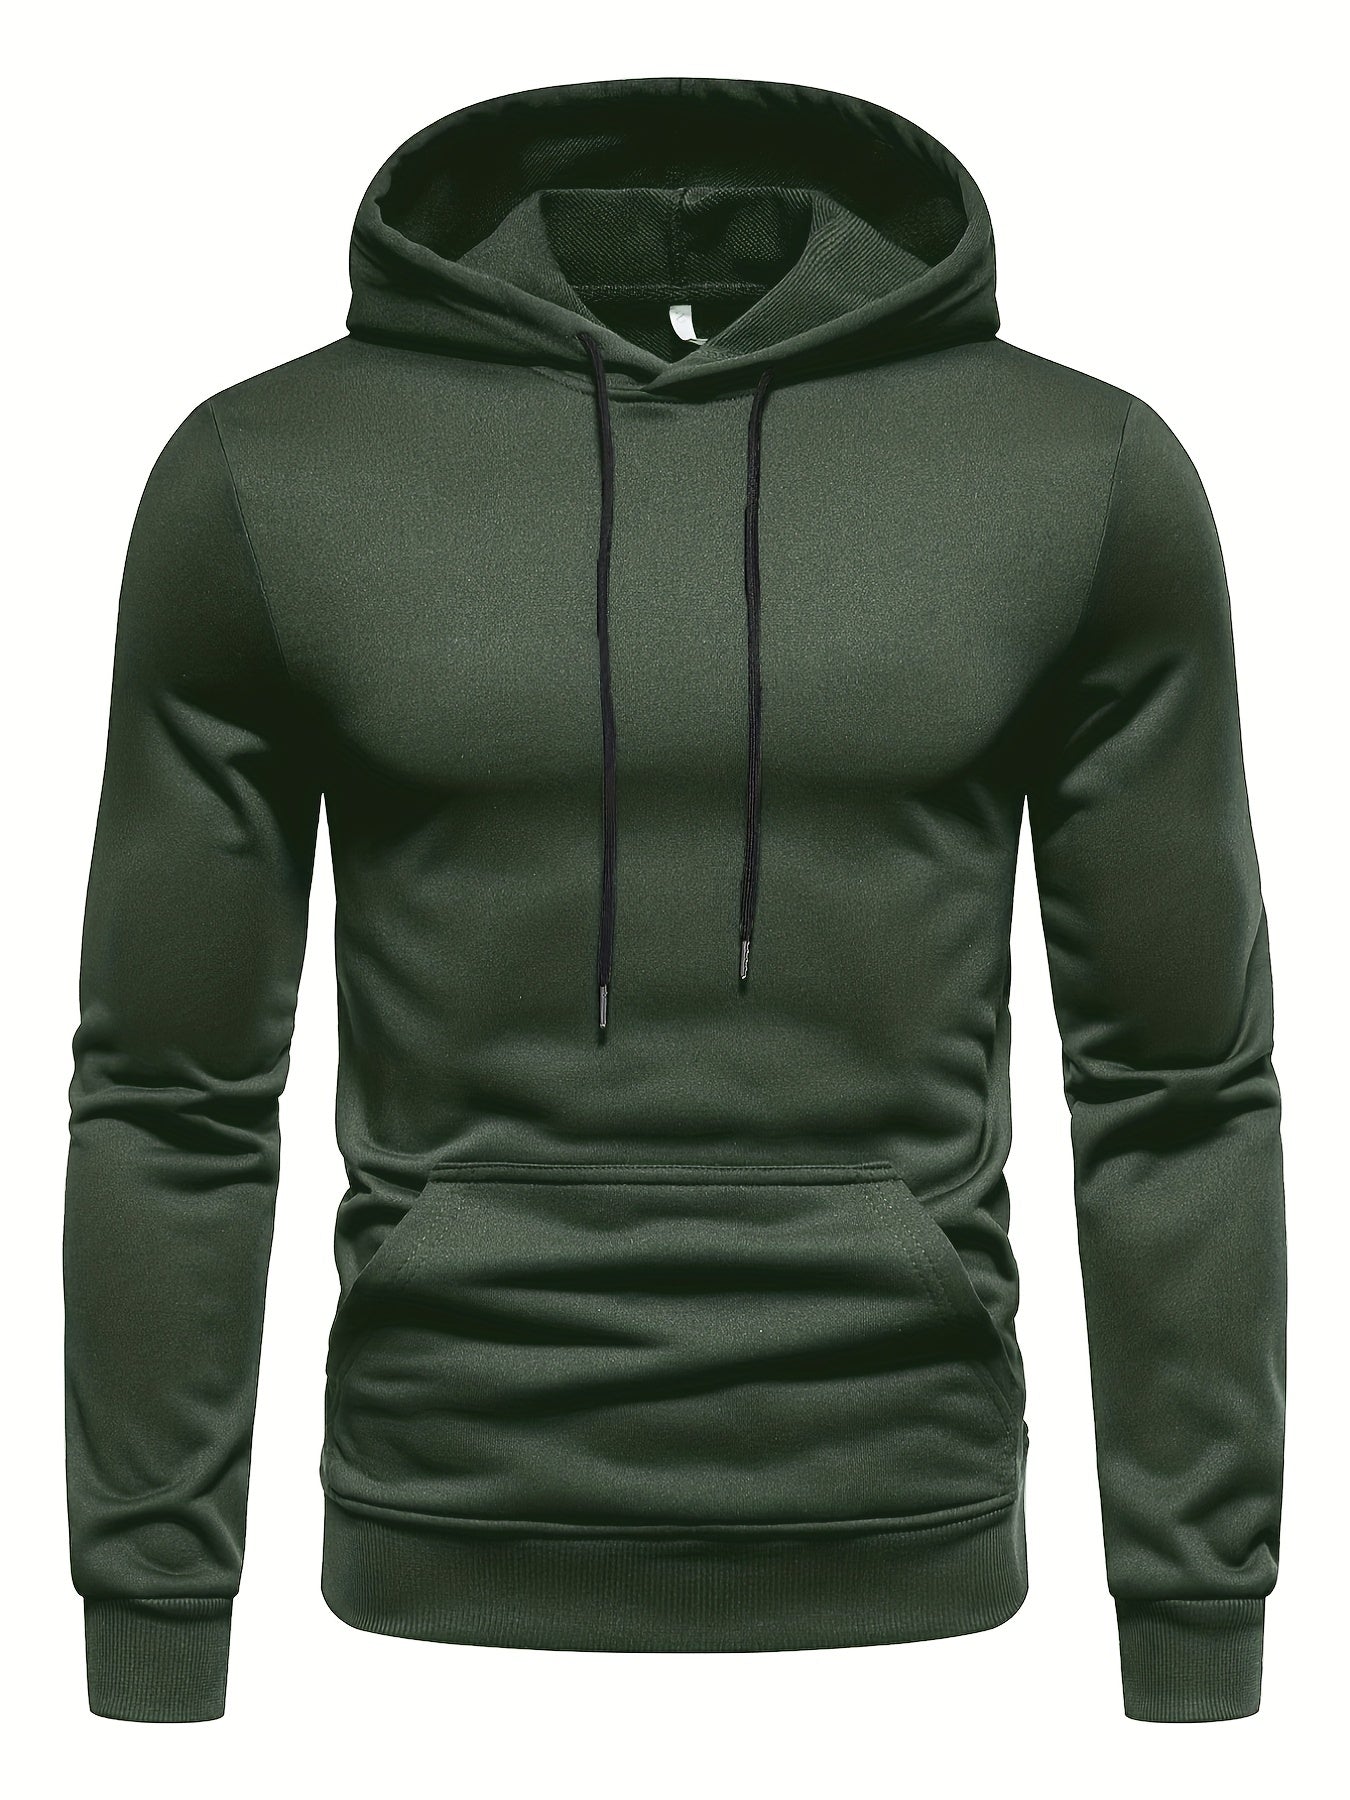 Men's Long Sleeve Solid Hoodies Street Casual Sports And Fashionable With Kangaroo Pocket Sweatshirt,Suitable For Outdoor Sports,For Autumn And Winter, Fashionable And Versatile